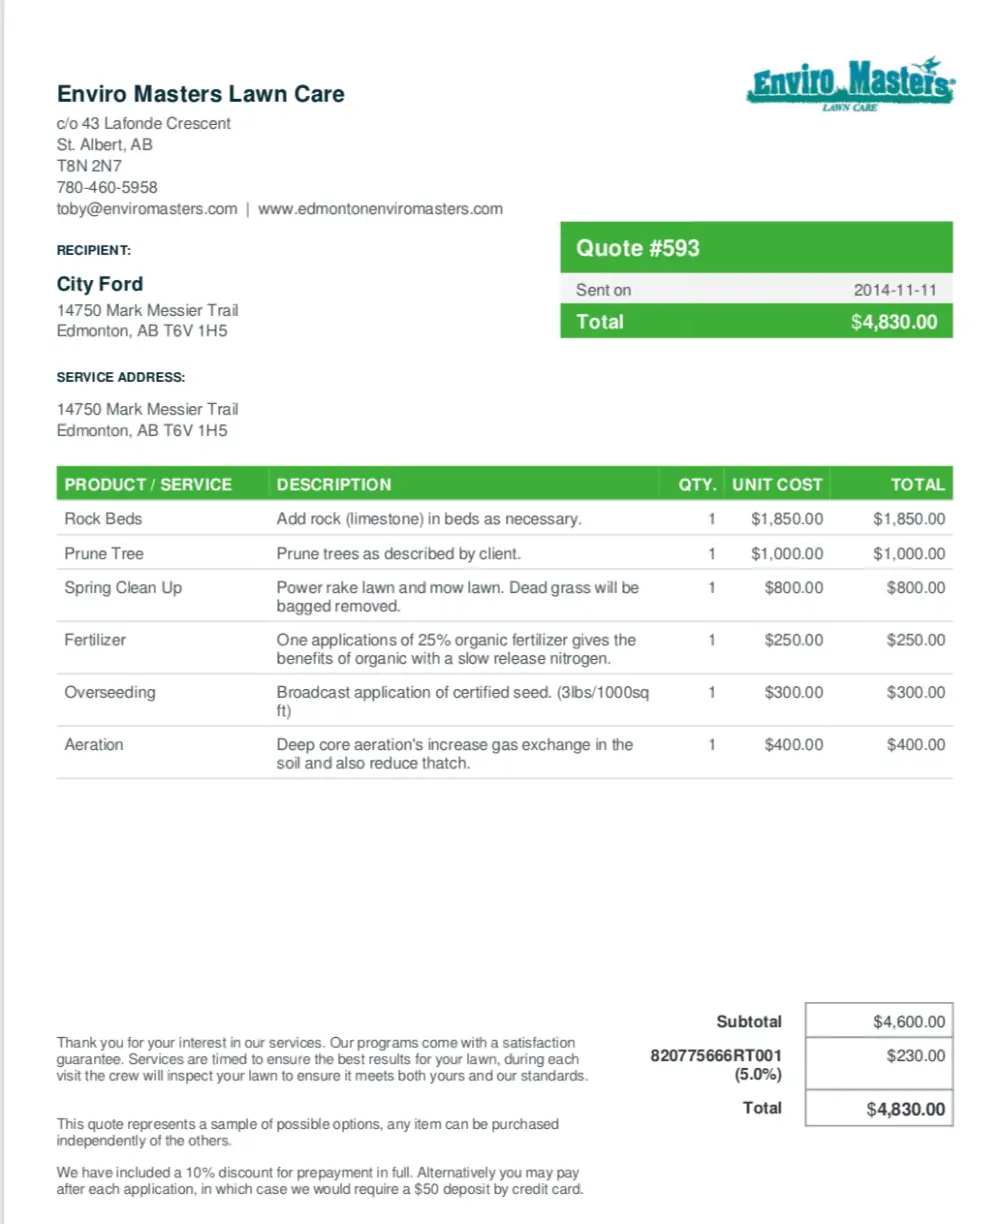 Everything You Need to Know About Lawn Care Invoices [Free Template]